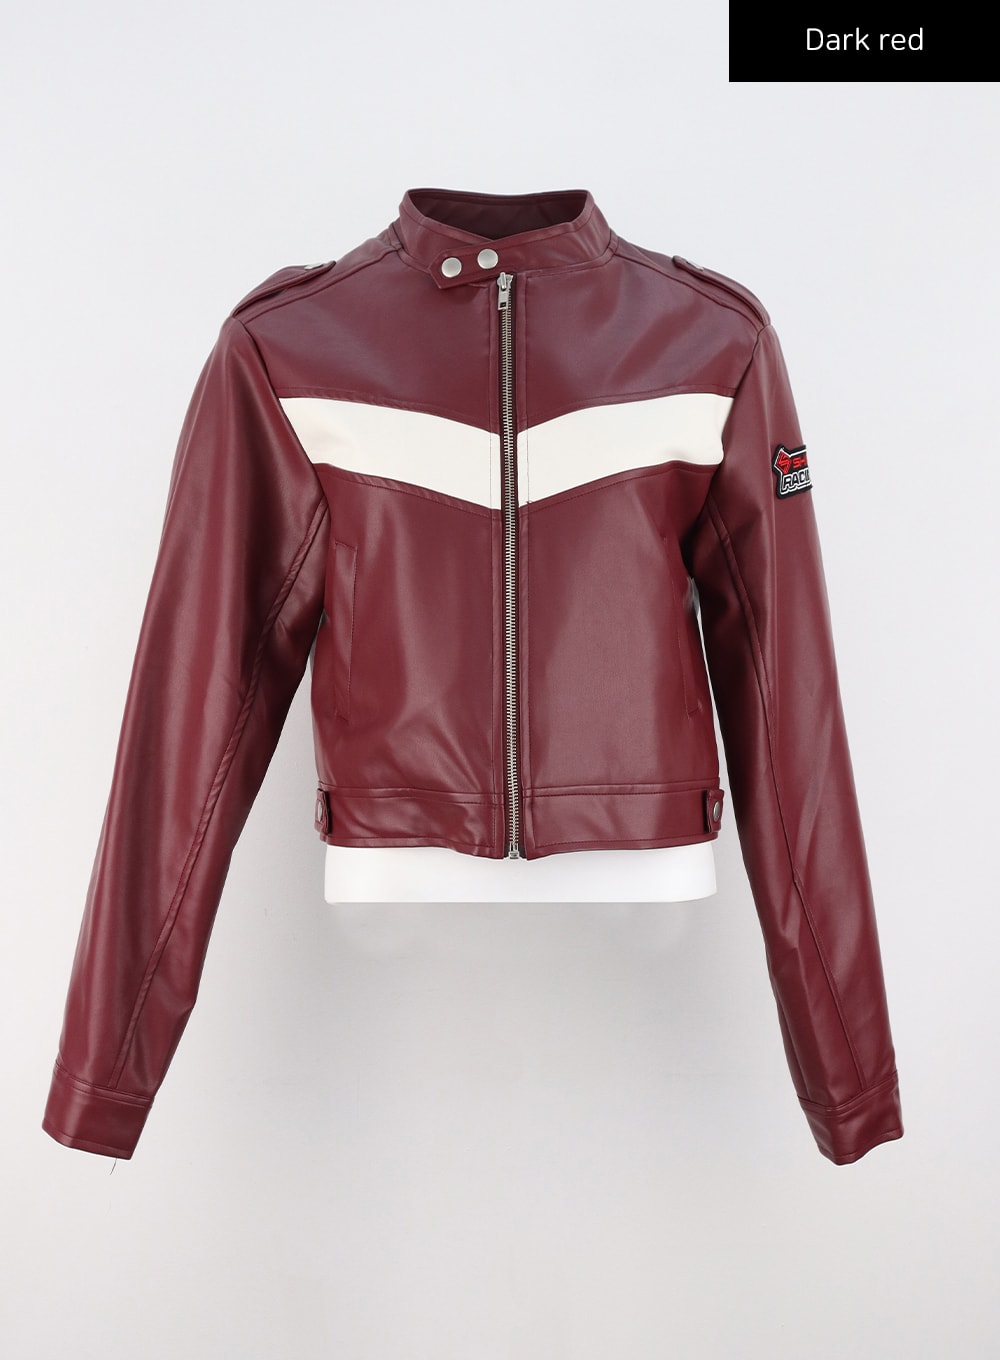 fit-faux-leather-nascar-jacket-cs326 / Dark red